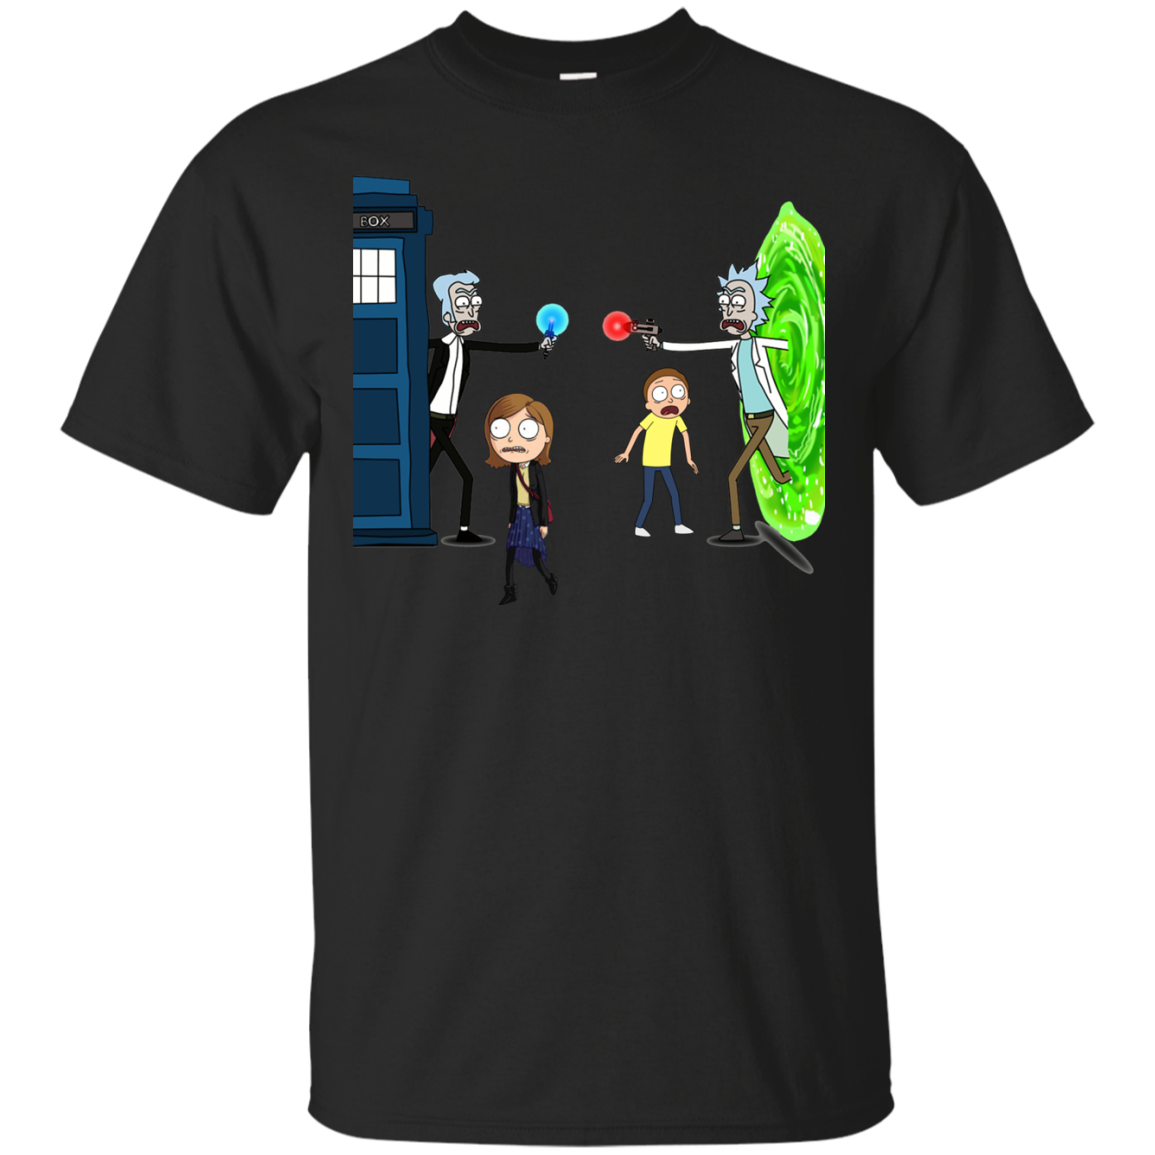 Rick and morty doctor who t shirt pink boutique